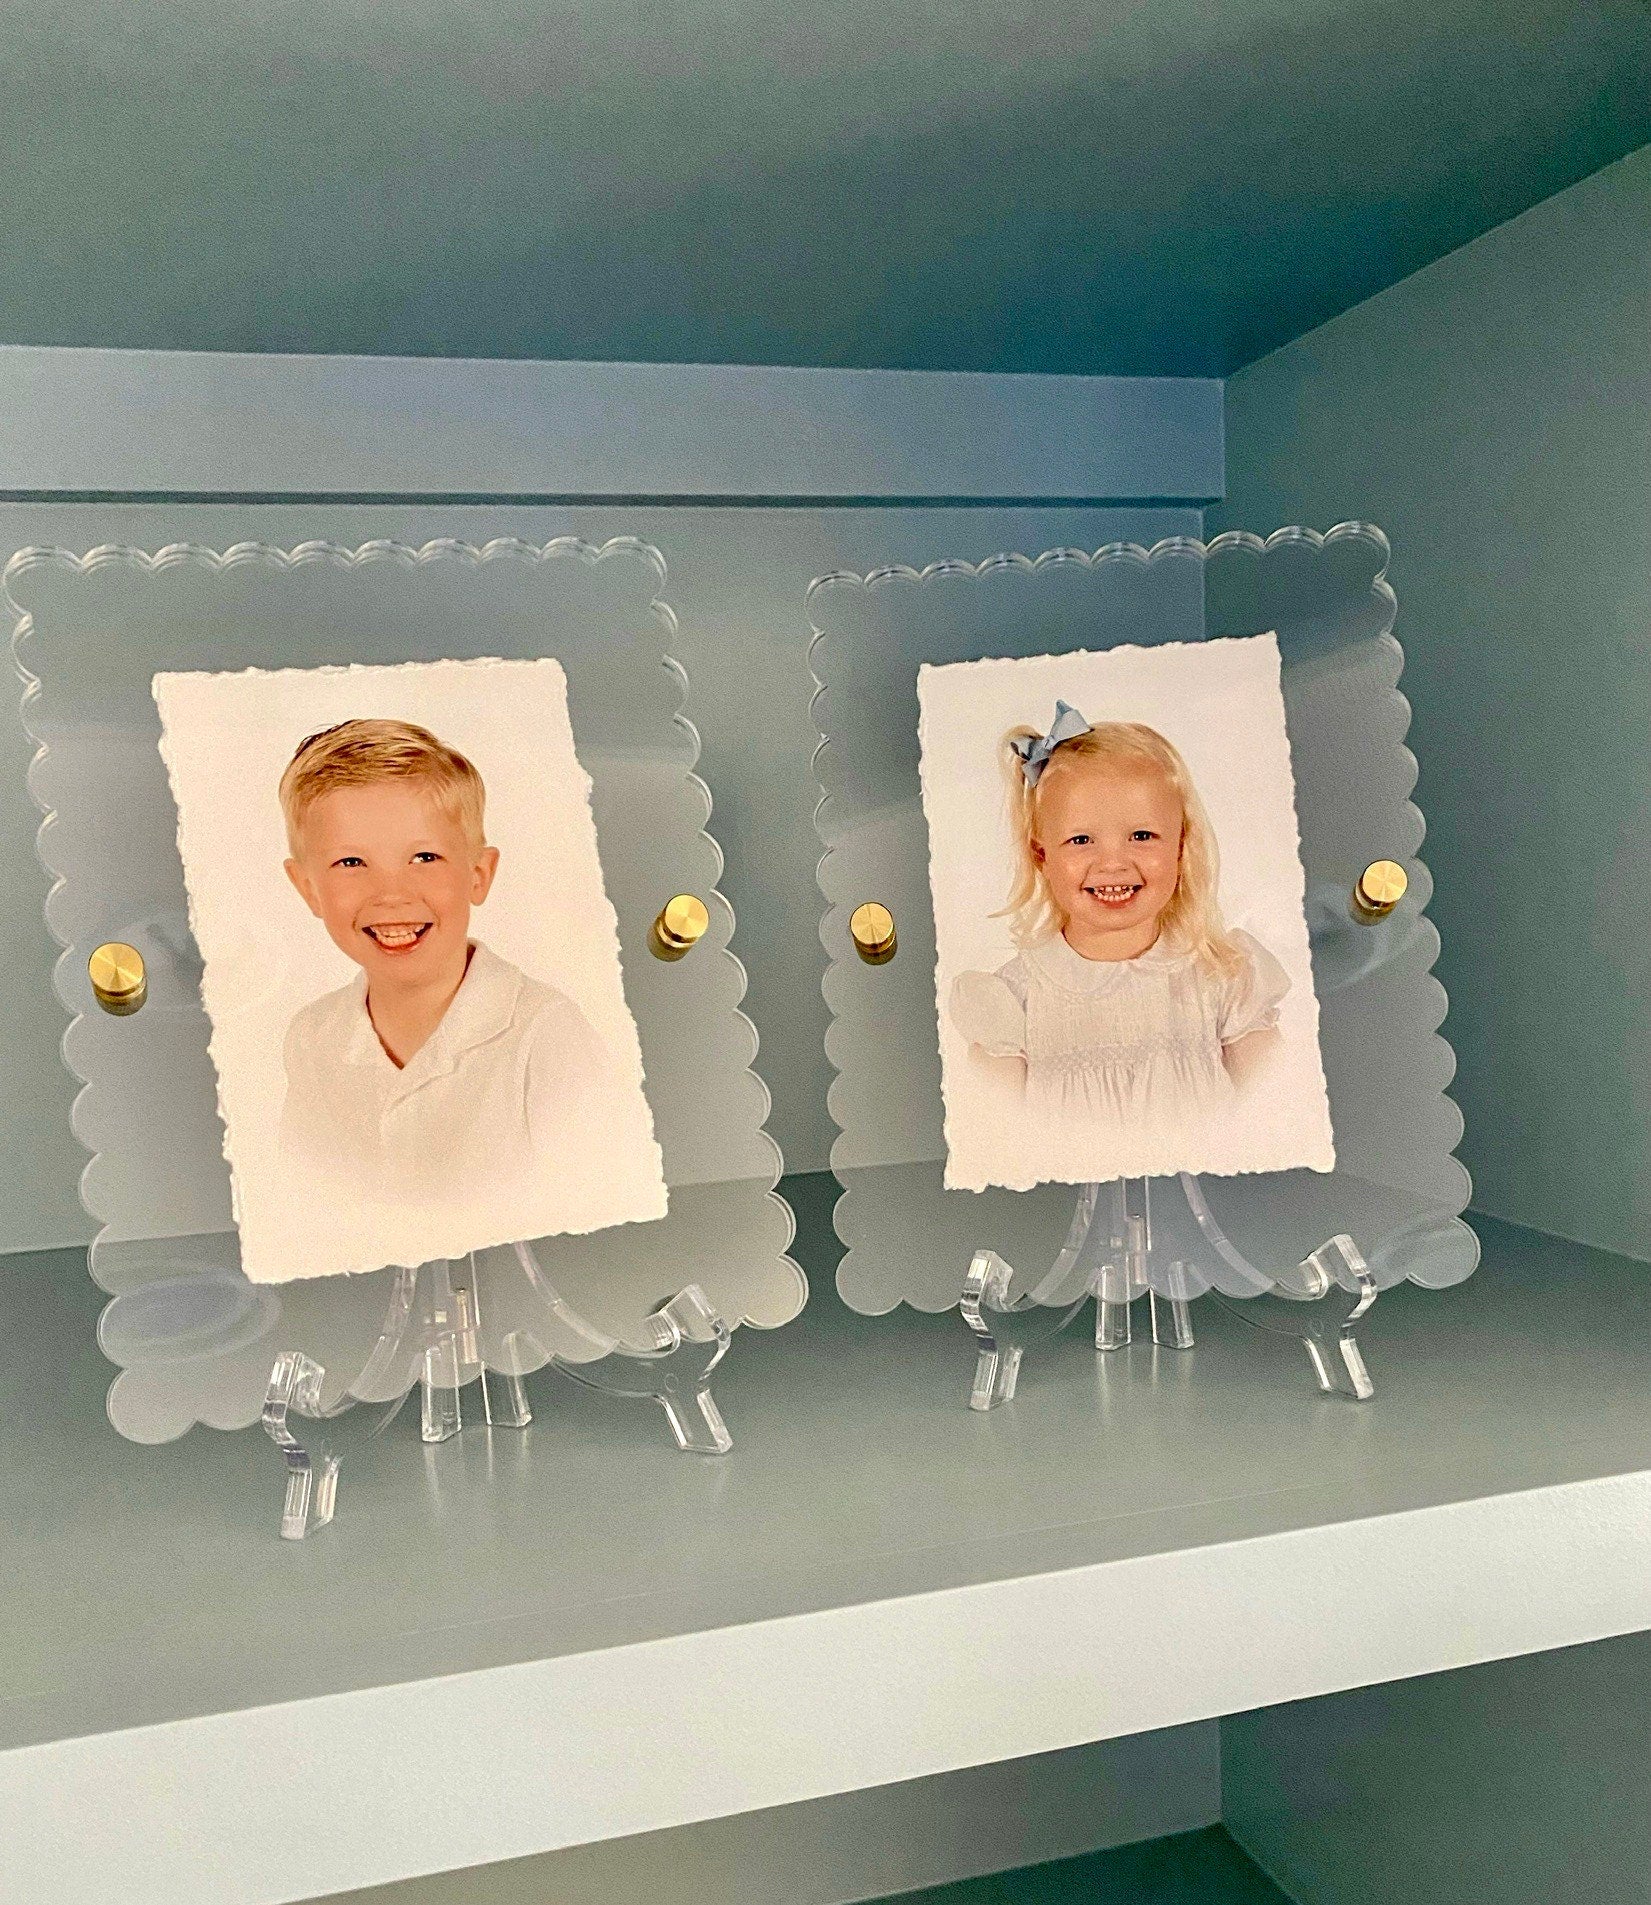 Clear Acrylic Frame With Scalloped Edge, Custom Picture Frame, Floating Acrylic Art, Baby Picture Frame, 5x7 Photo Frame, Acrylic Framed Art